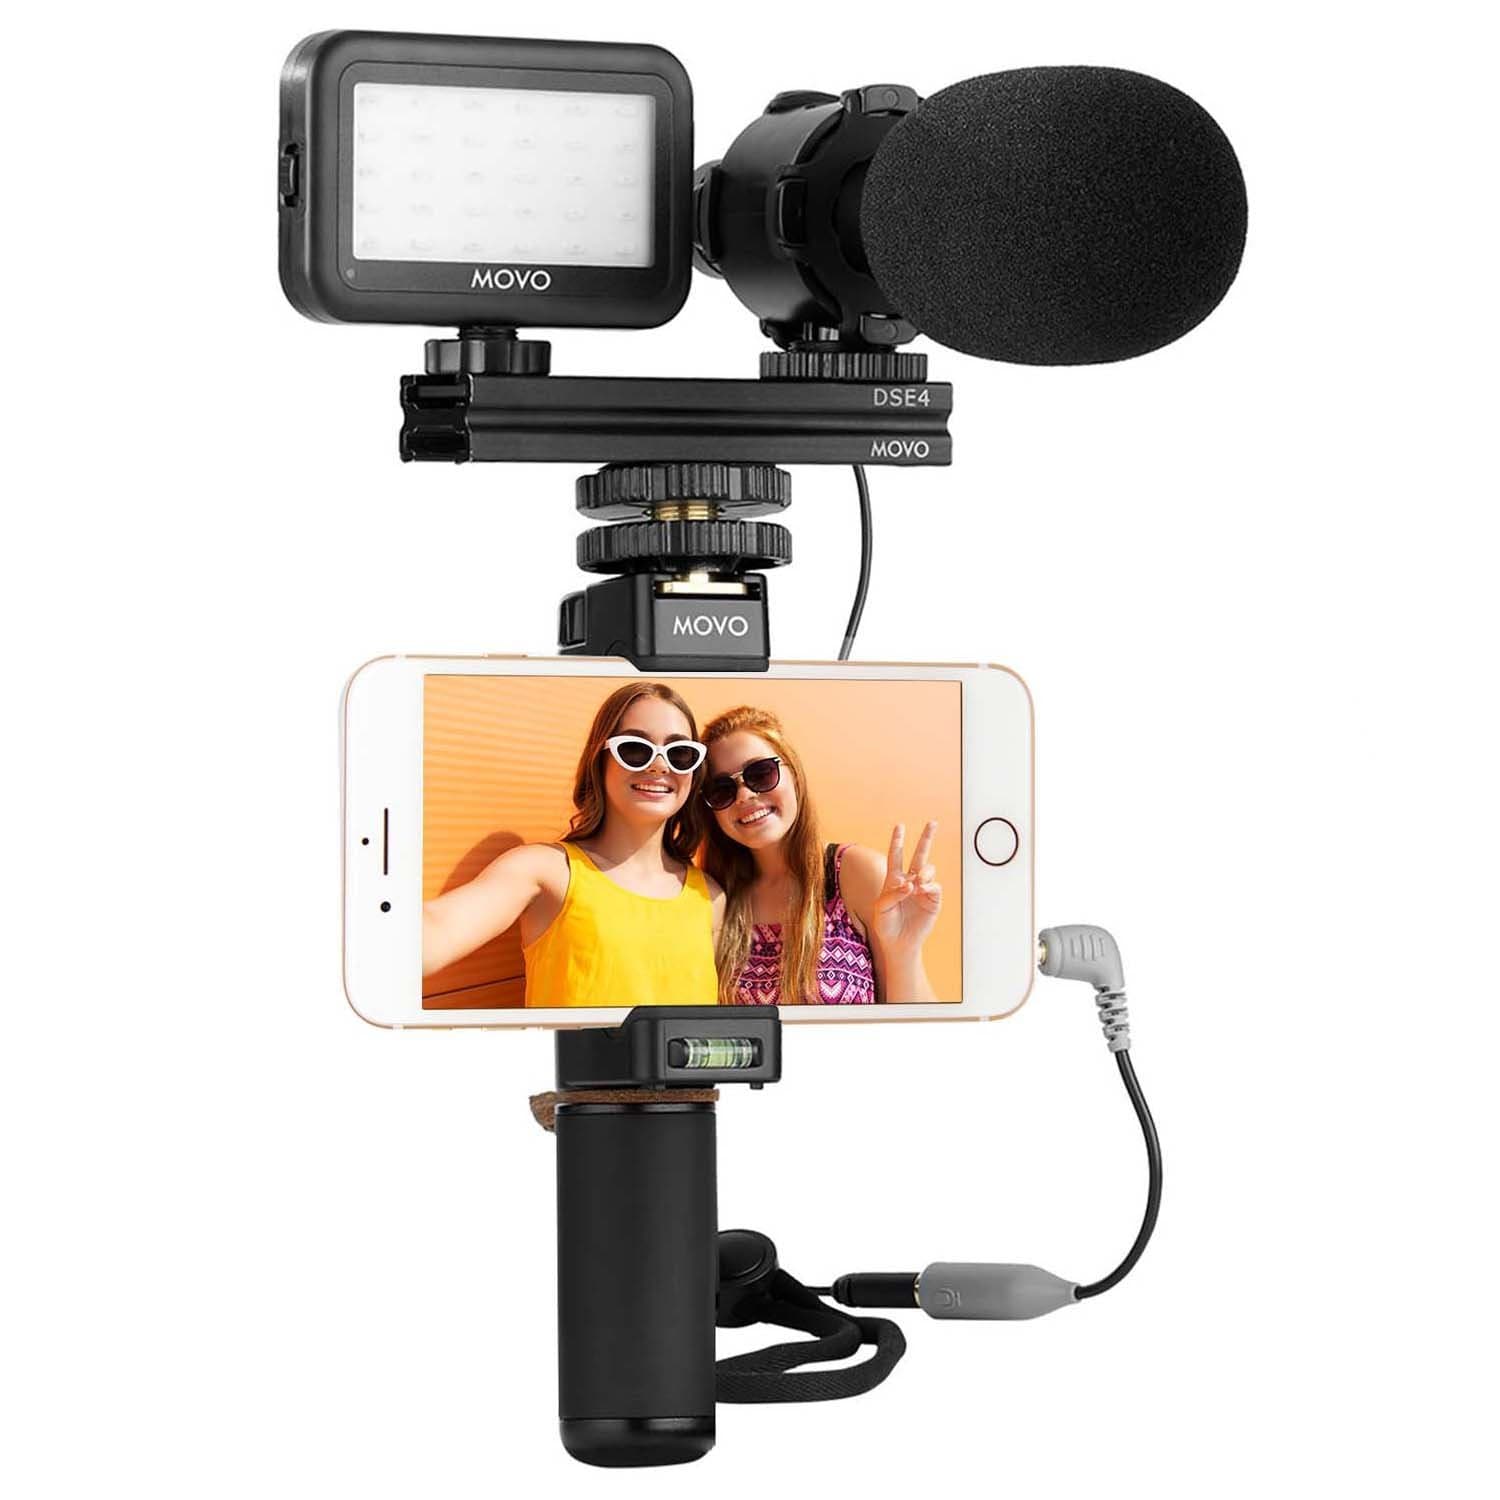 Level up Your Gear: Smartphone Accessories & Smartphone Video Kits